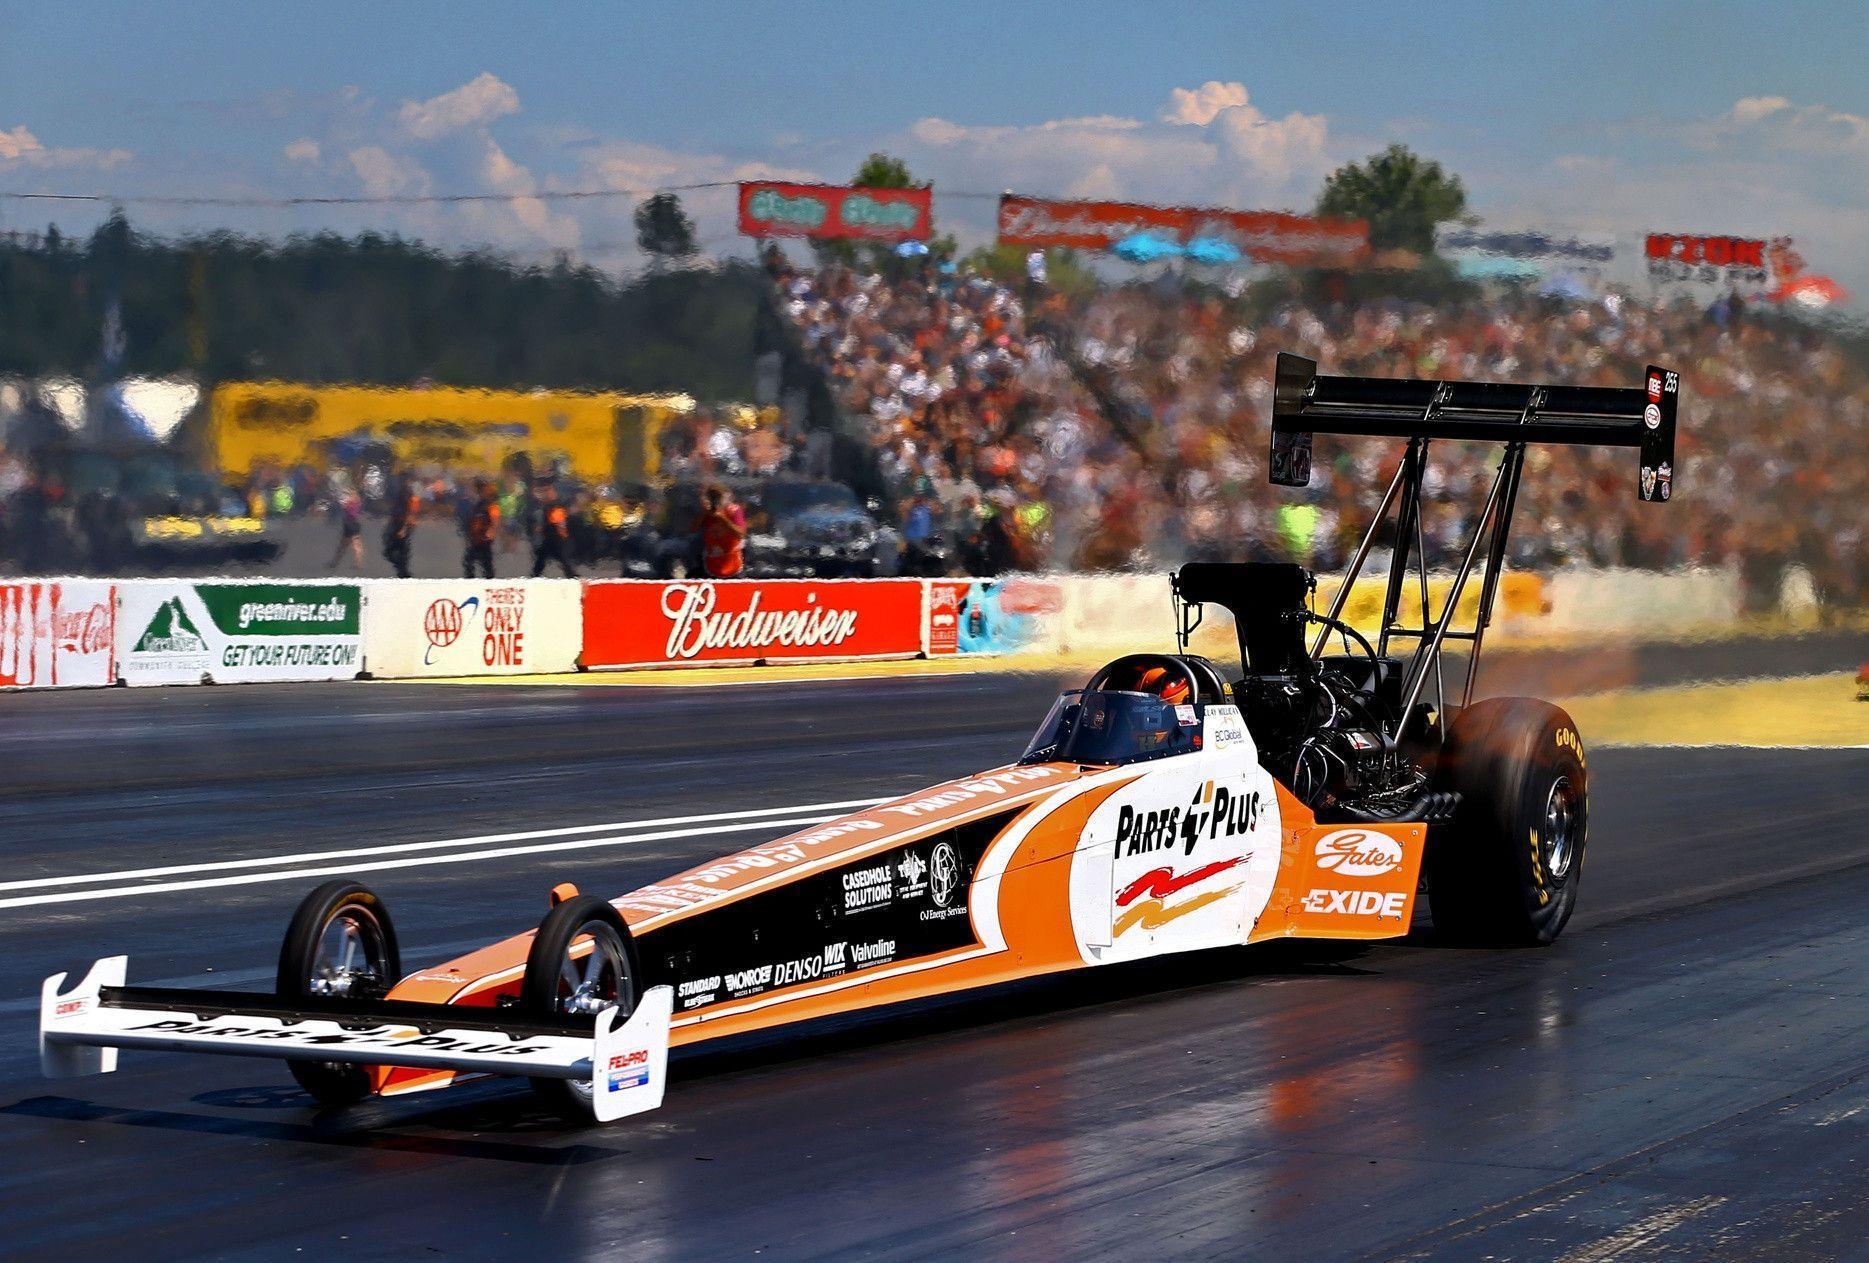 Gallery For Gt Nhra Top Fuel Dragster Wallpaper